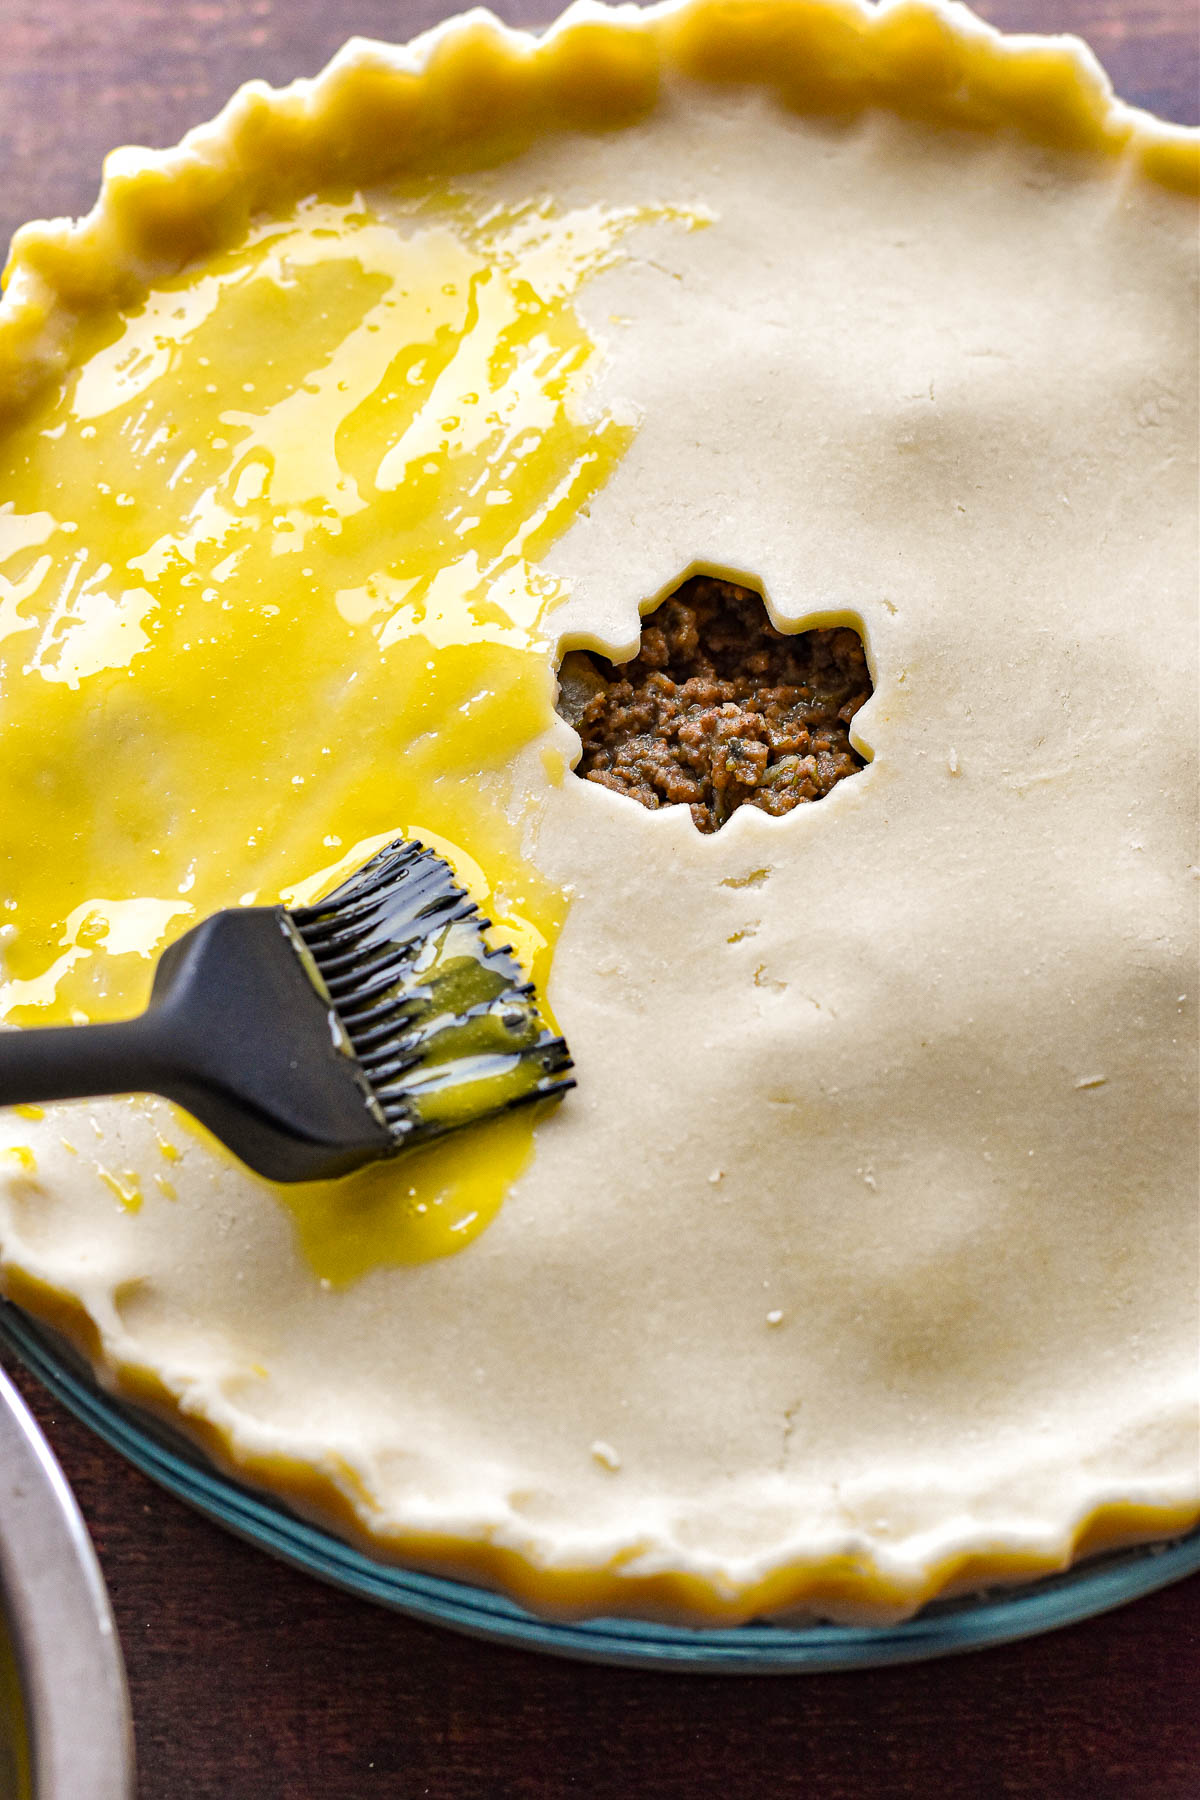 a basting brush applying egg yolk to the gluten-free crust of a low fodmap tourtiere prior to baking.